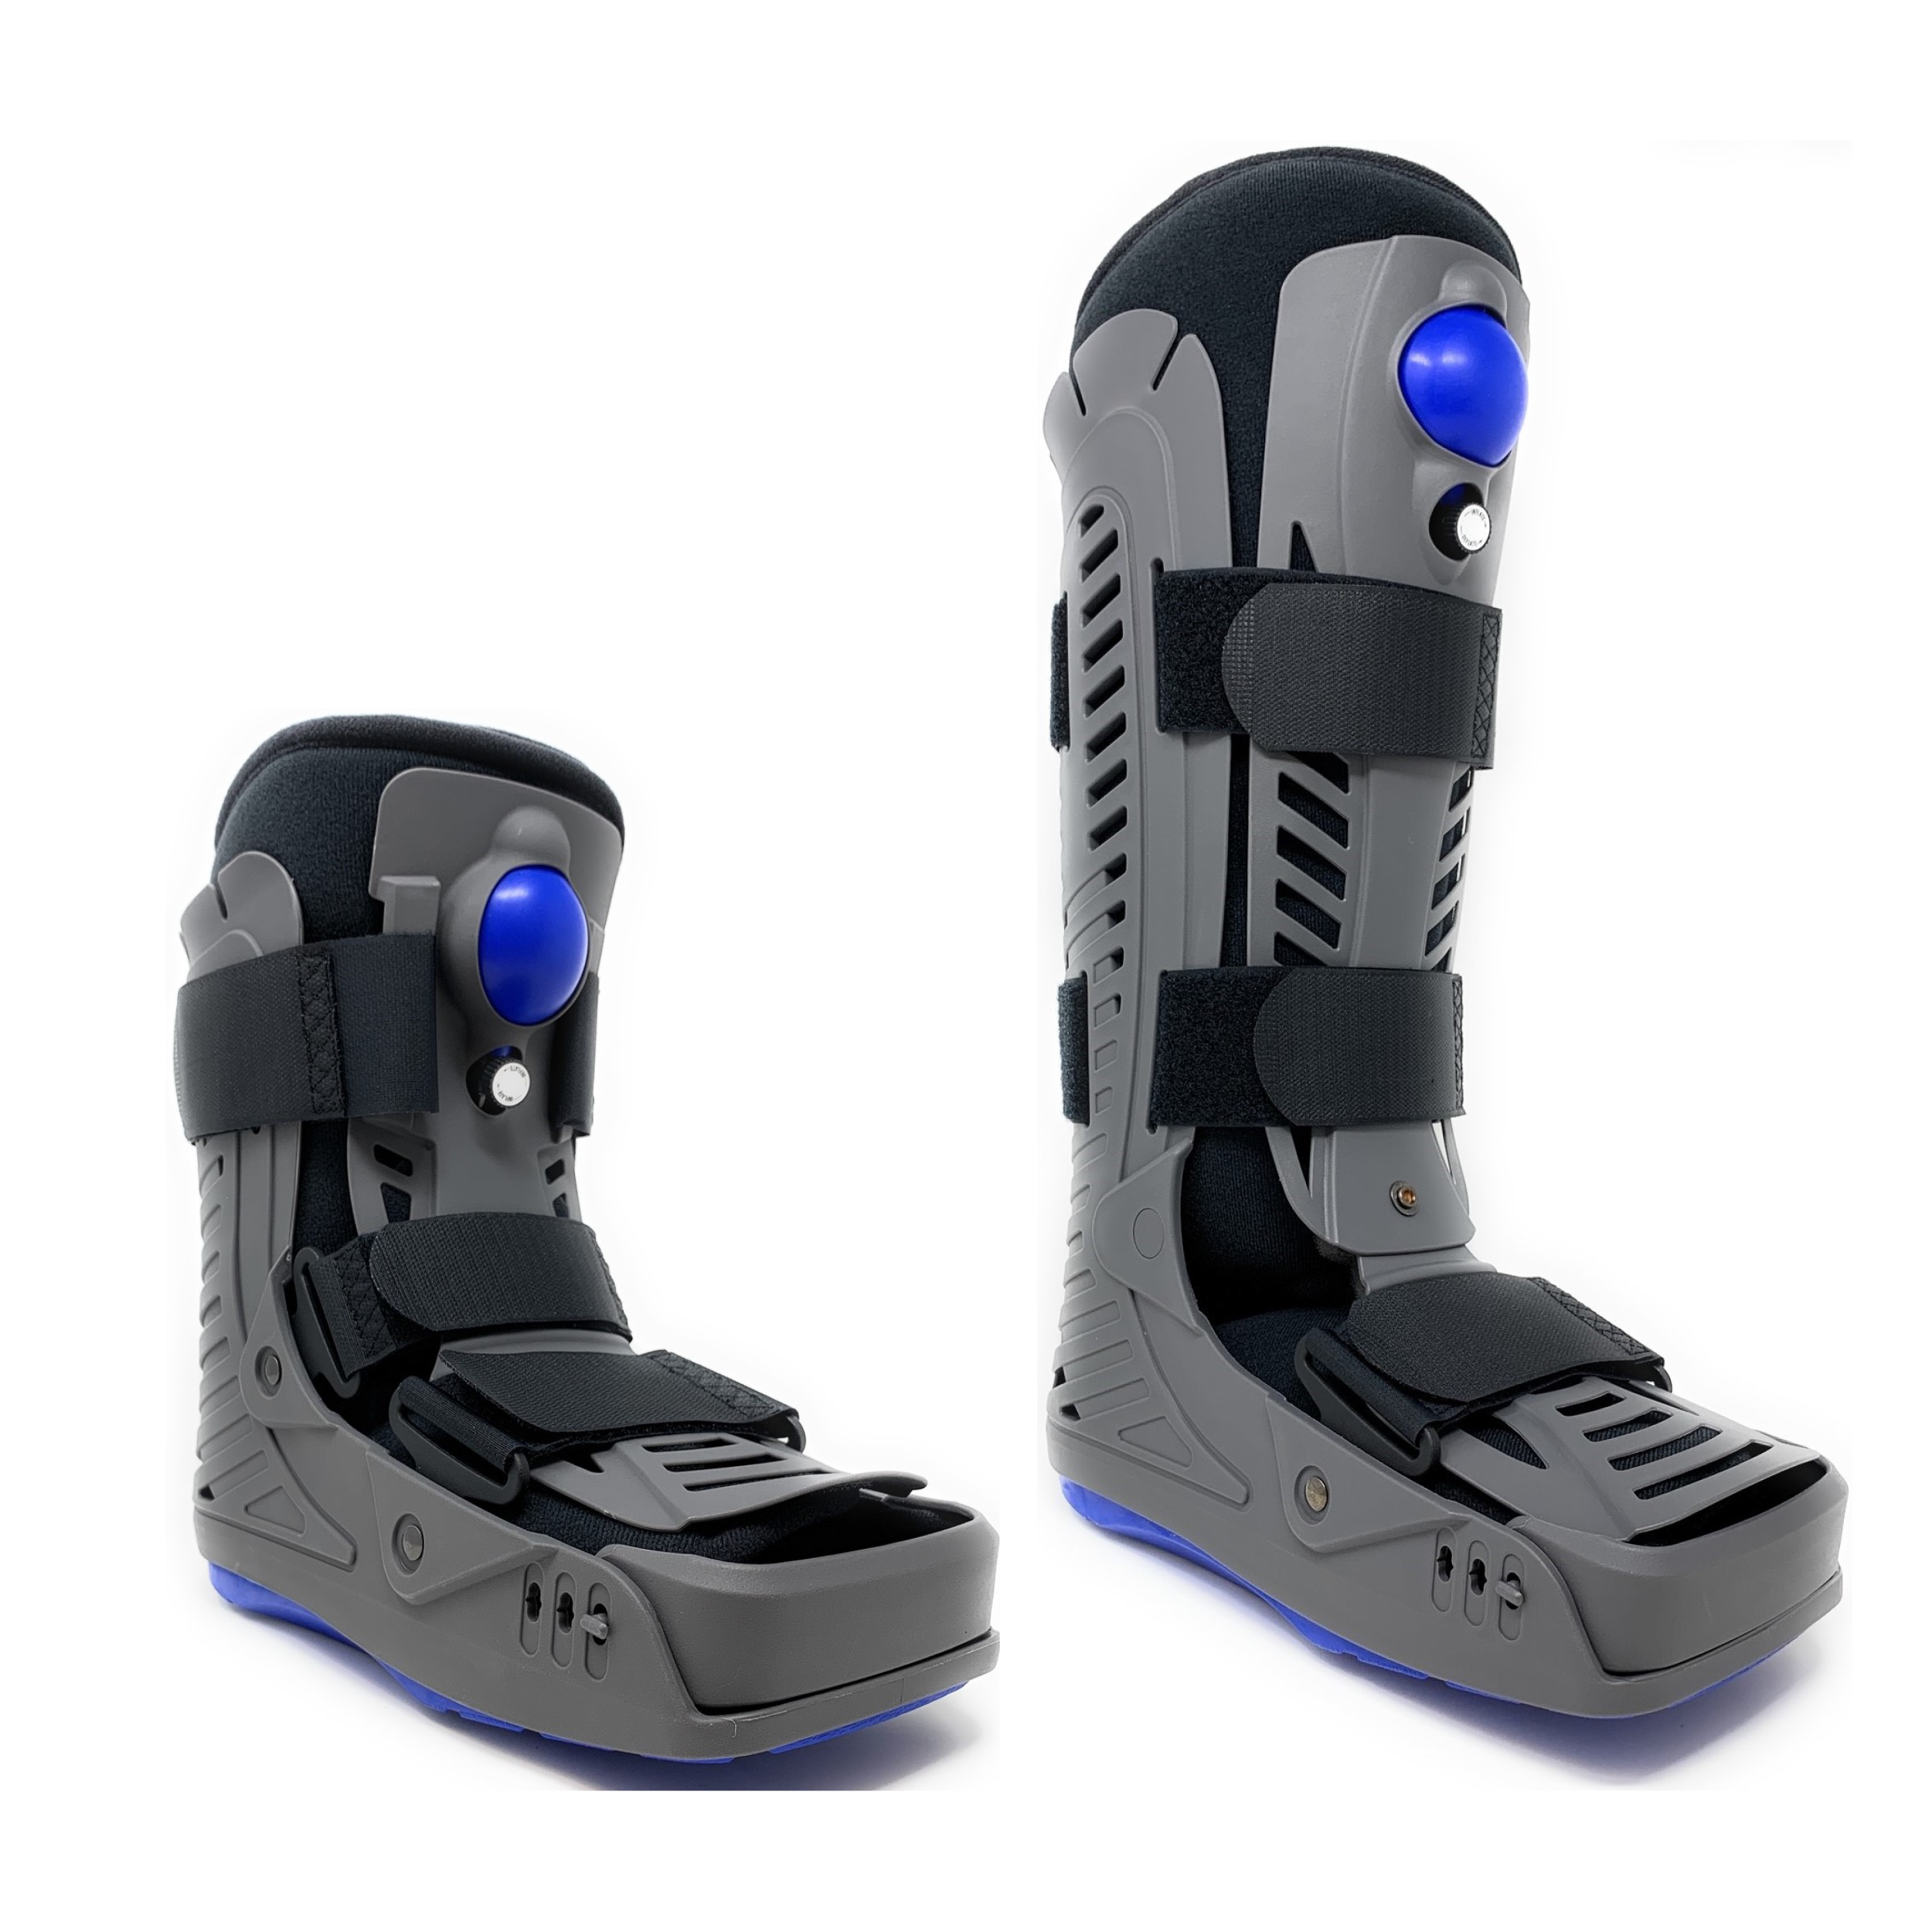 Aero Walker™ (Hi Top and Low Top) SUGGESTED HCPC: L4360 and L4361